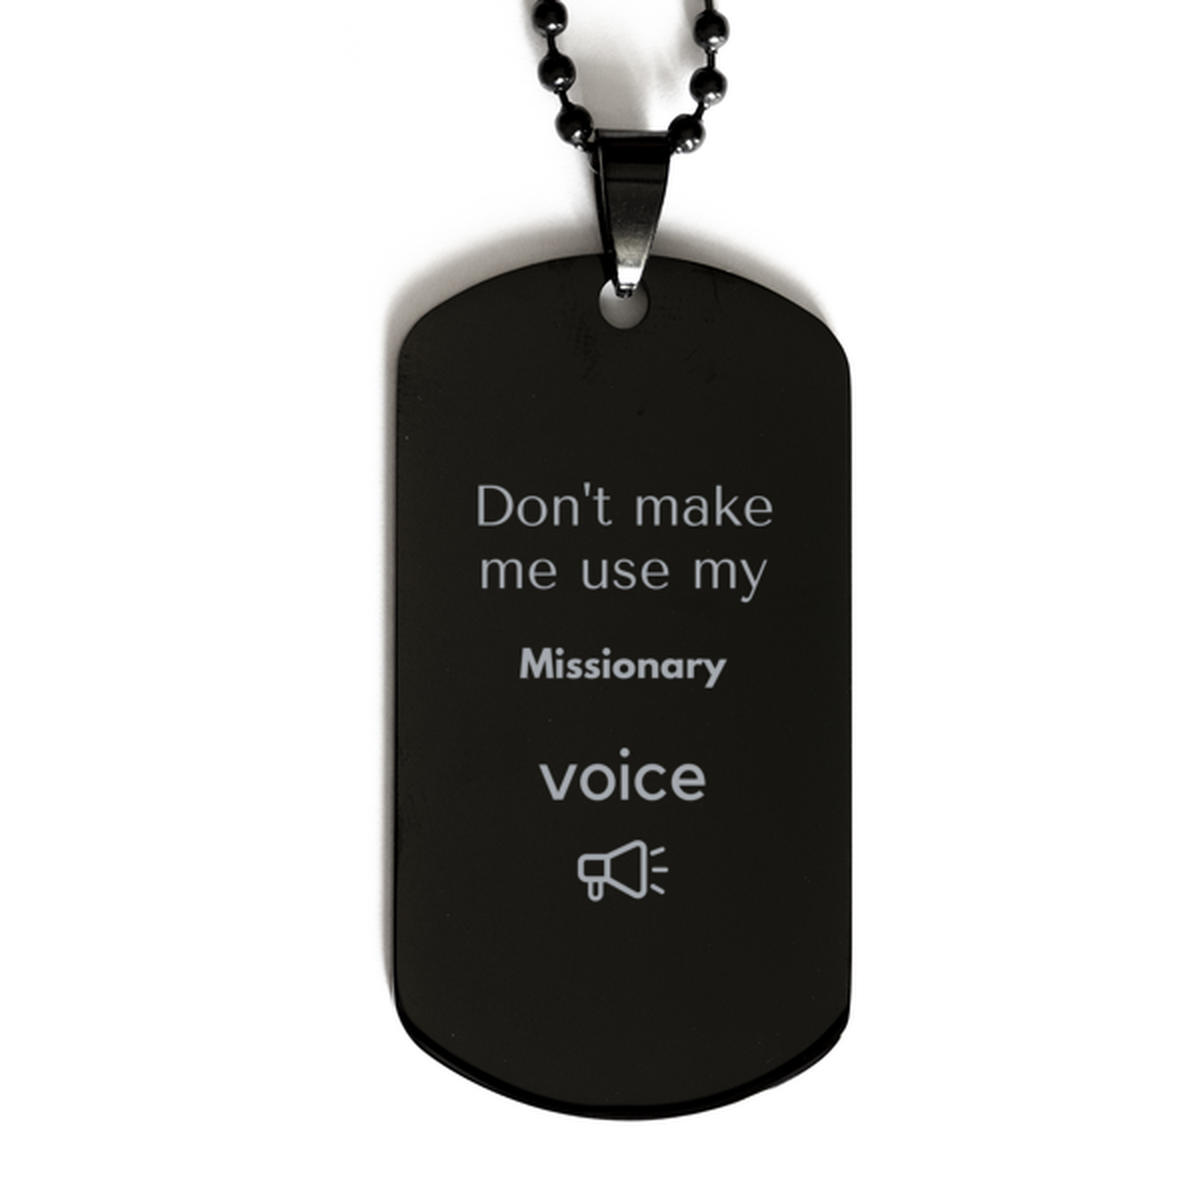 Don't make me use my Missionary voice, Sarcasm Missionary Gifts, Christmas Missionary Black Dog Tag Birthday Unique Gifts For Missionary Coworkers, Men, Women, Colleague, Friends